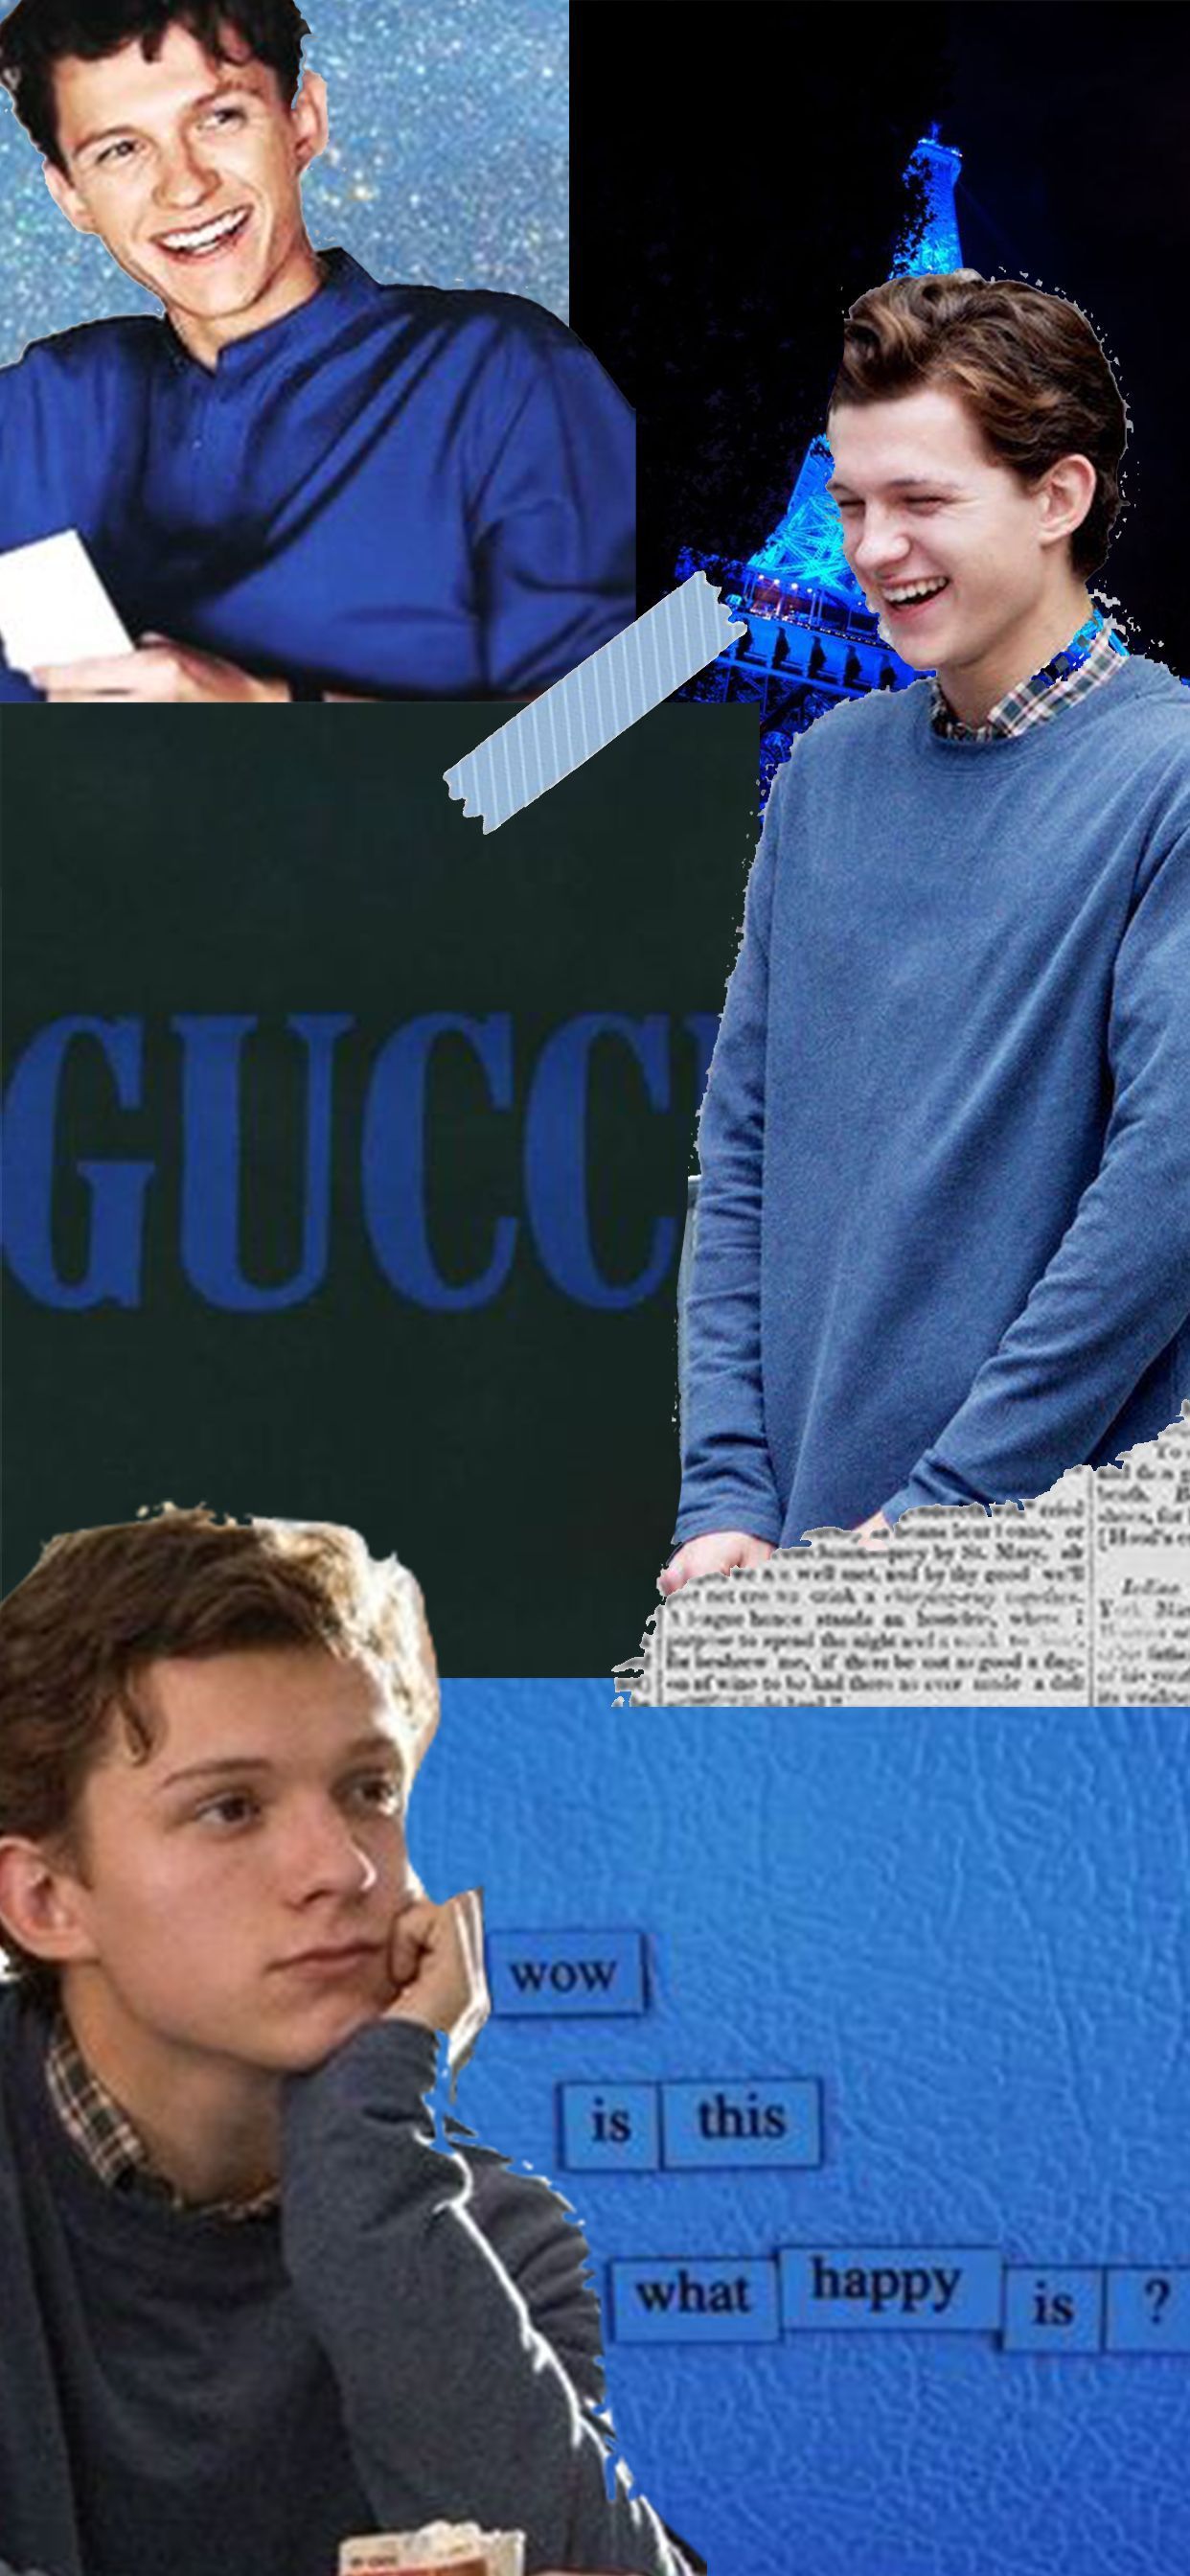 Tom Holland Aesthetic Wallpaper. Tom holland, Tom holland blue outfit, Blue toms